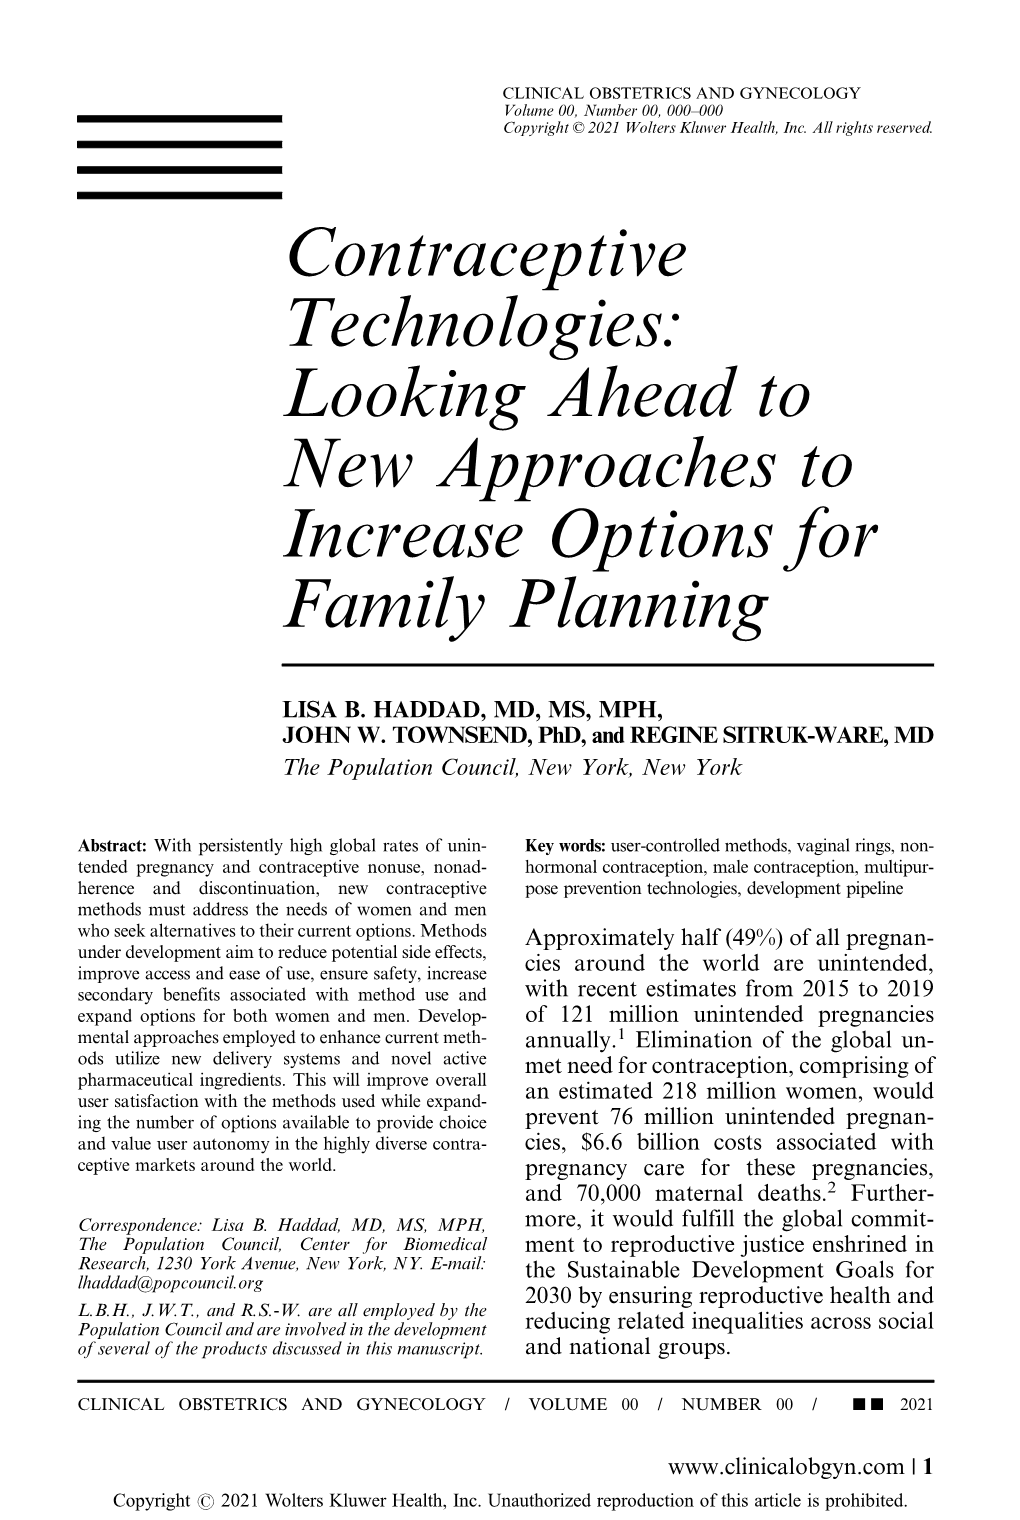 Contraceptive Technologies: Looking Ahead to New Approaches to Increase Options for Family Planning